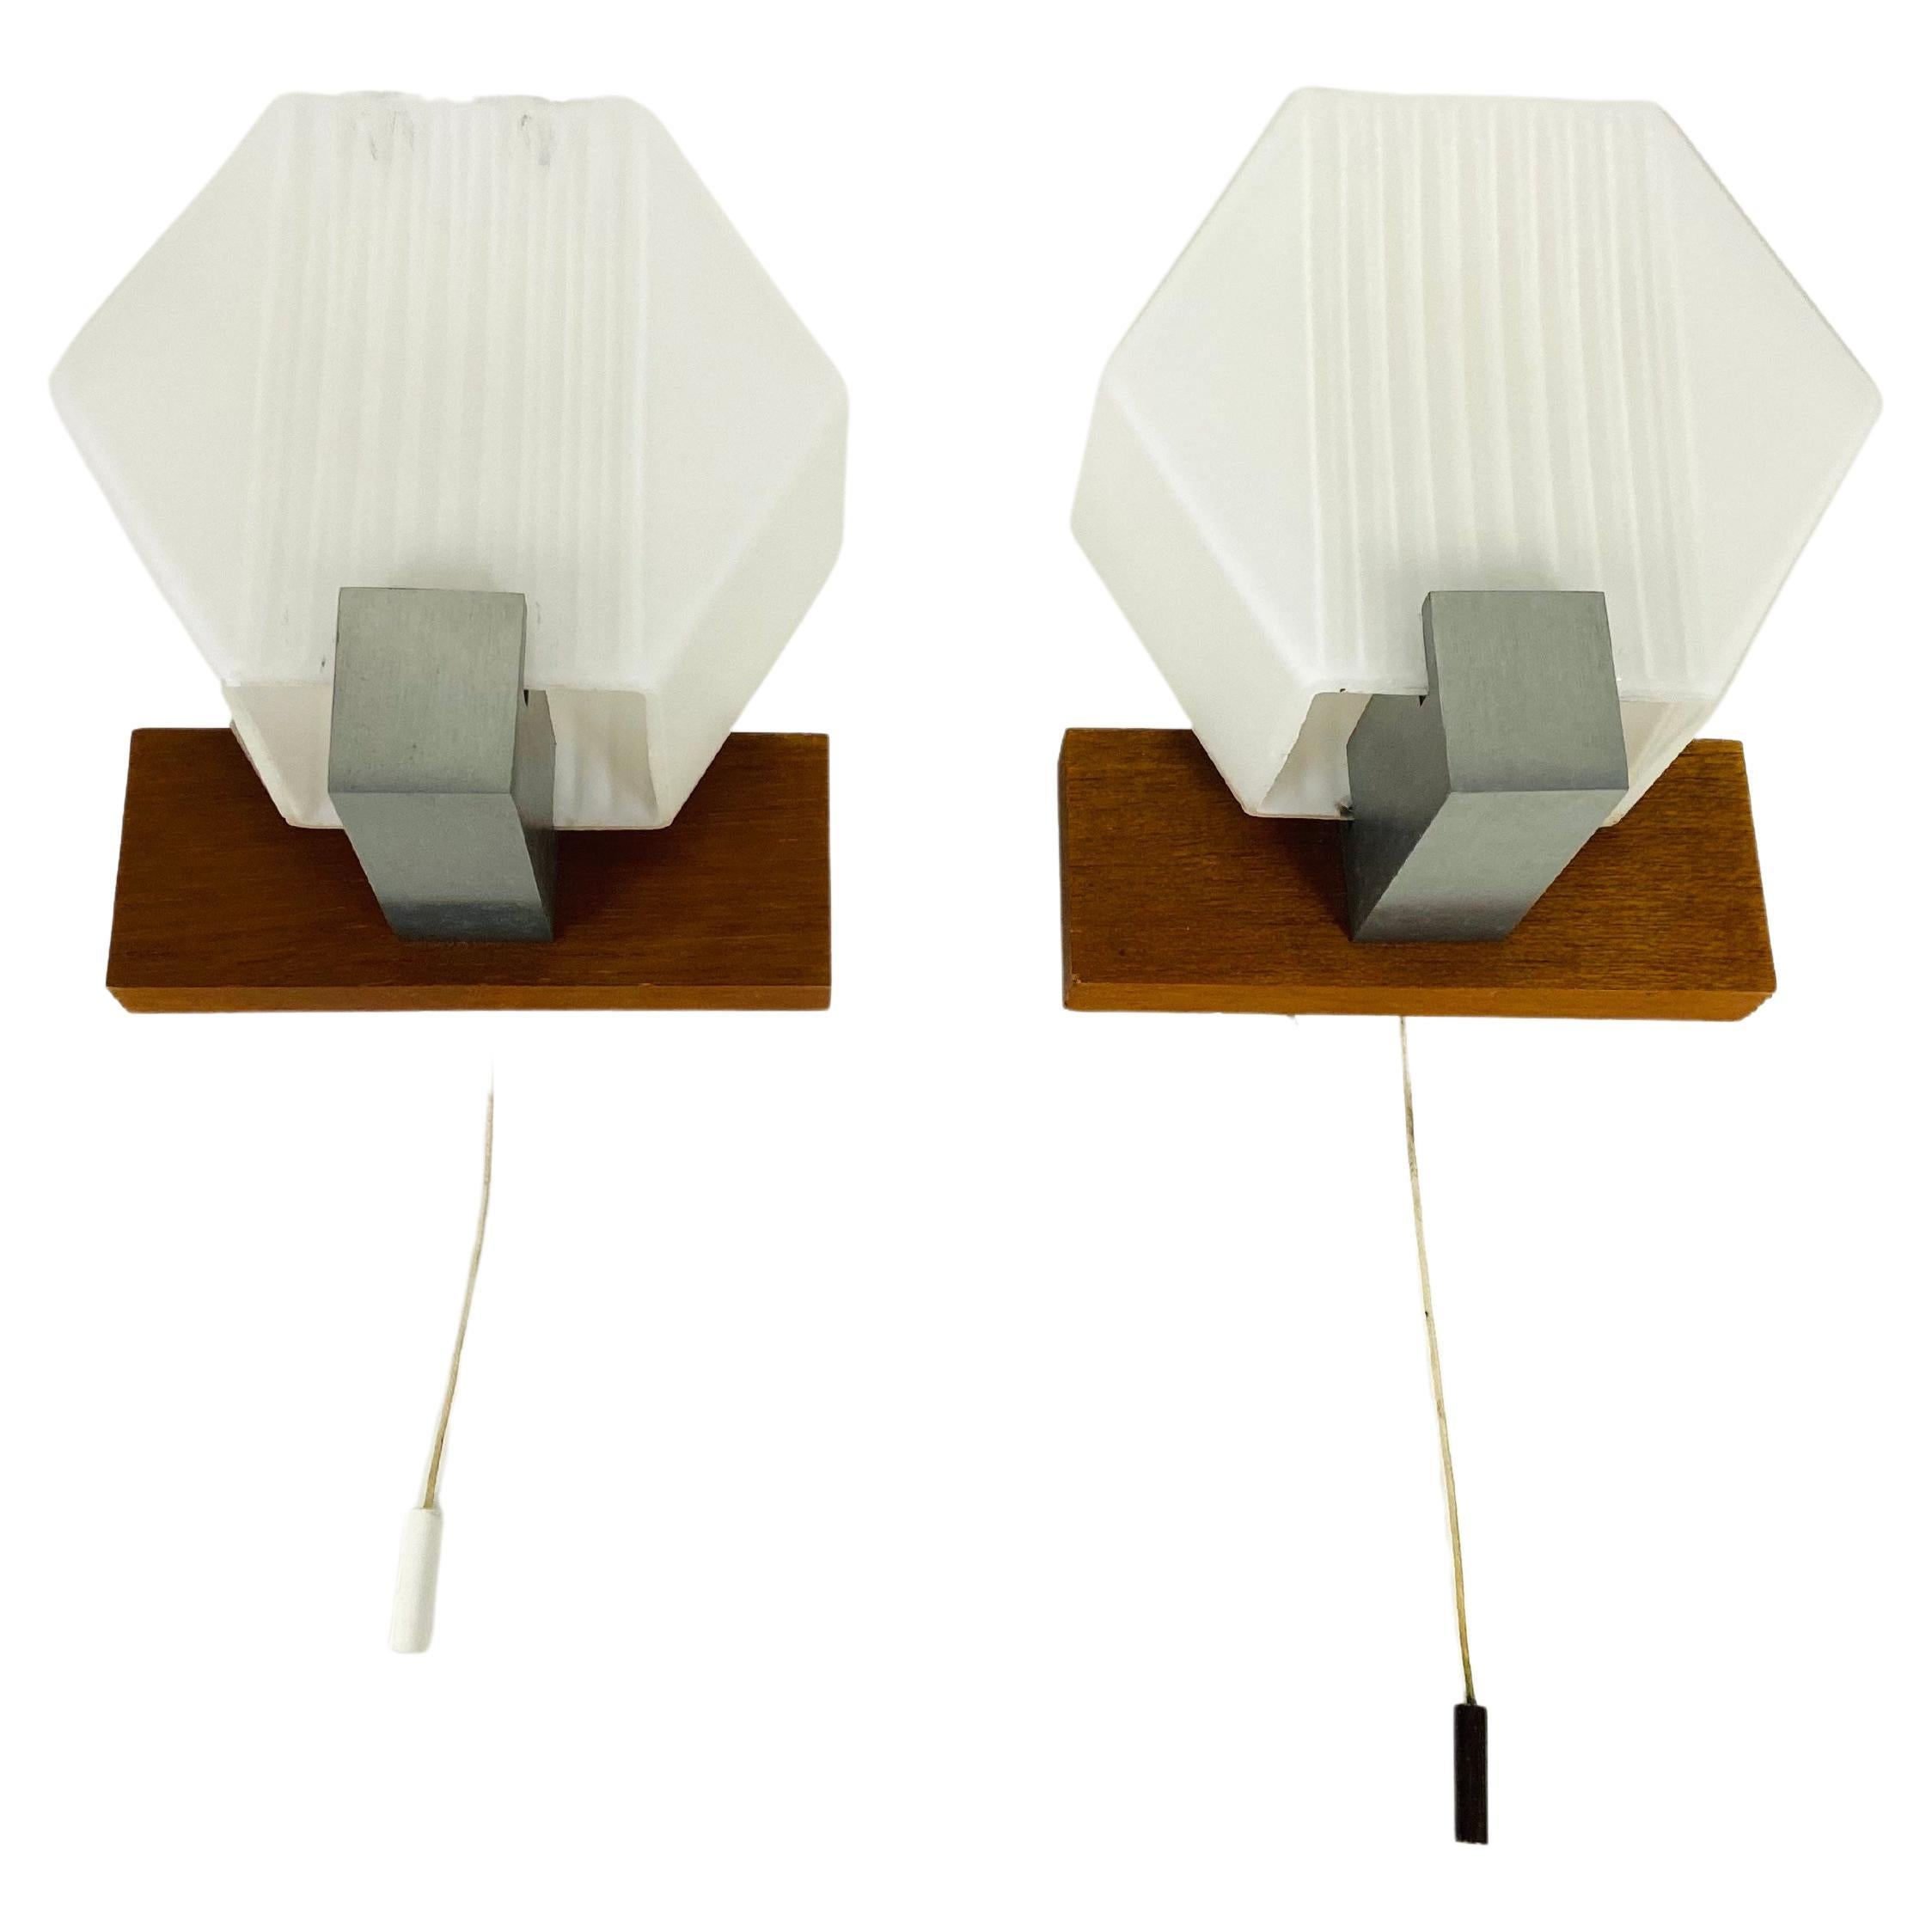 Pair of White Opal Glass and Teak Wall Lamps, 1970s, Germany